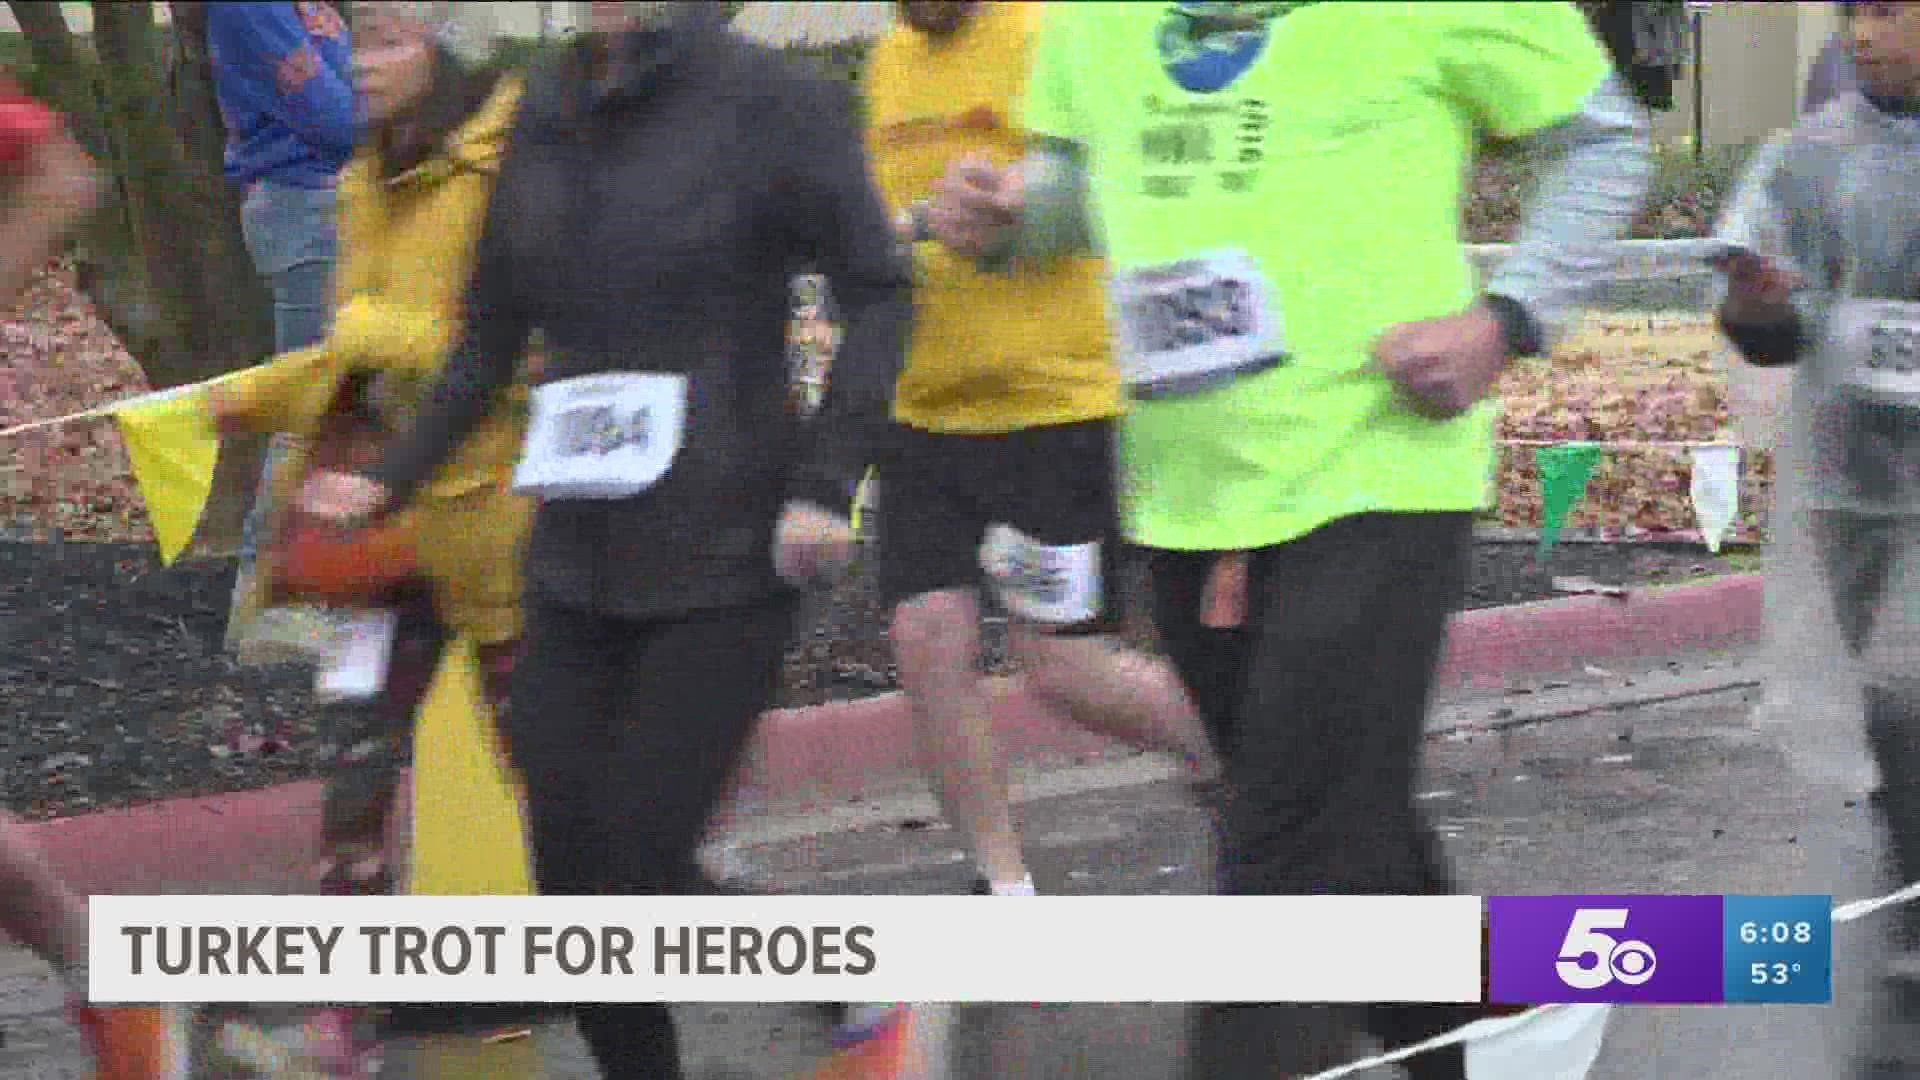 The Turkey Trot for Heroes isn’t a typical thanksgiving race. It's a race meant to remember those who have lost their lives in the line of duty.